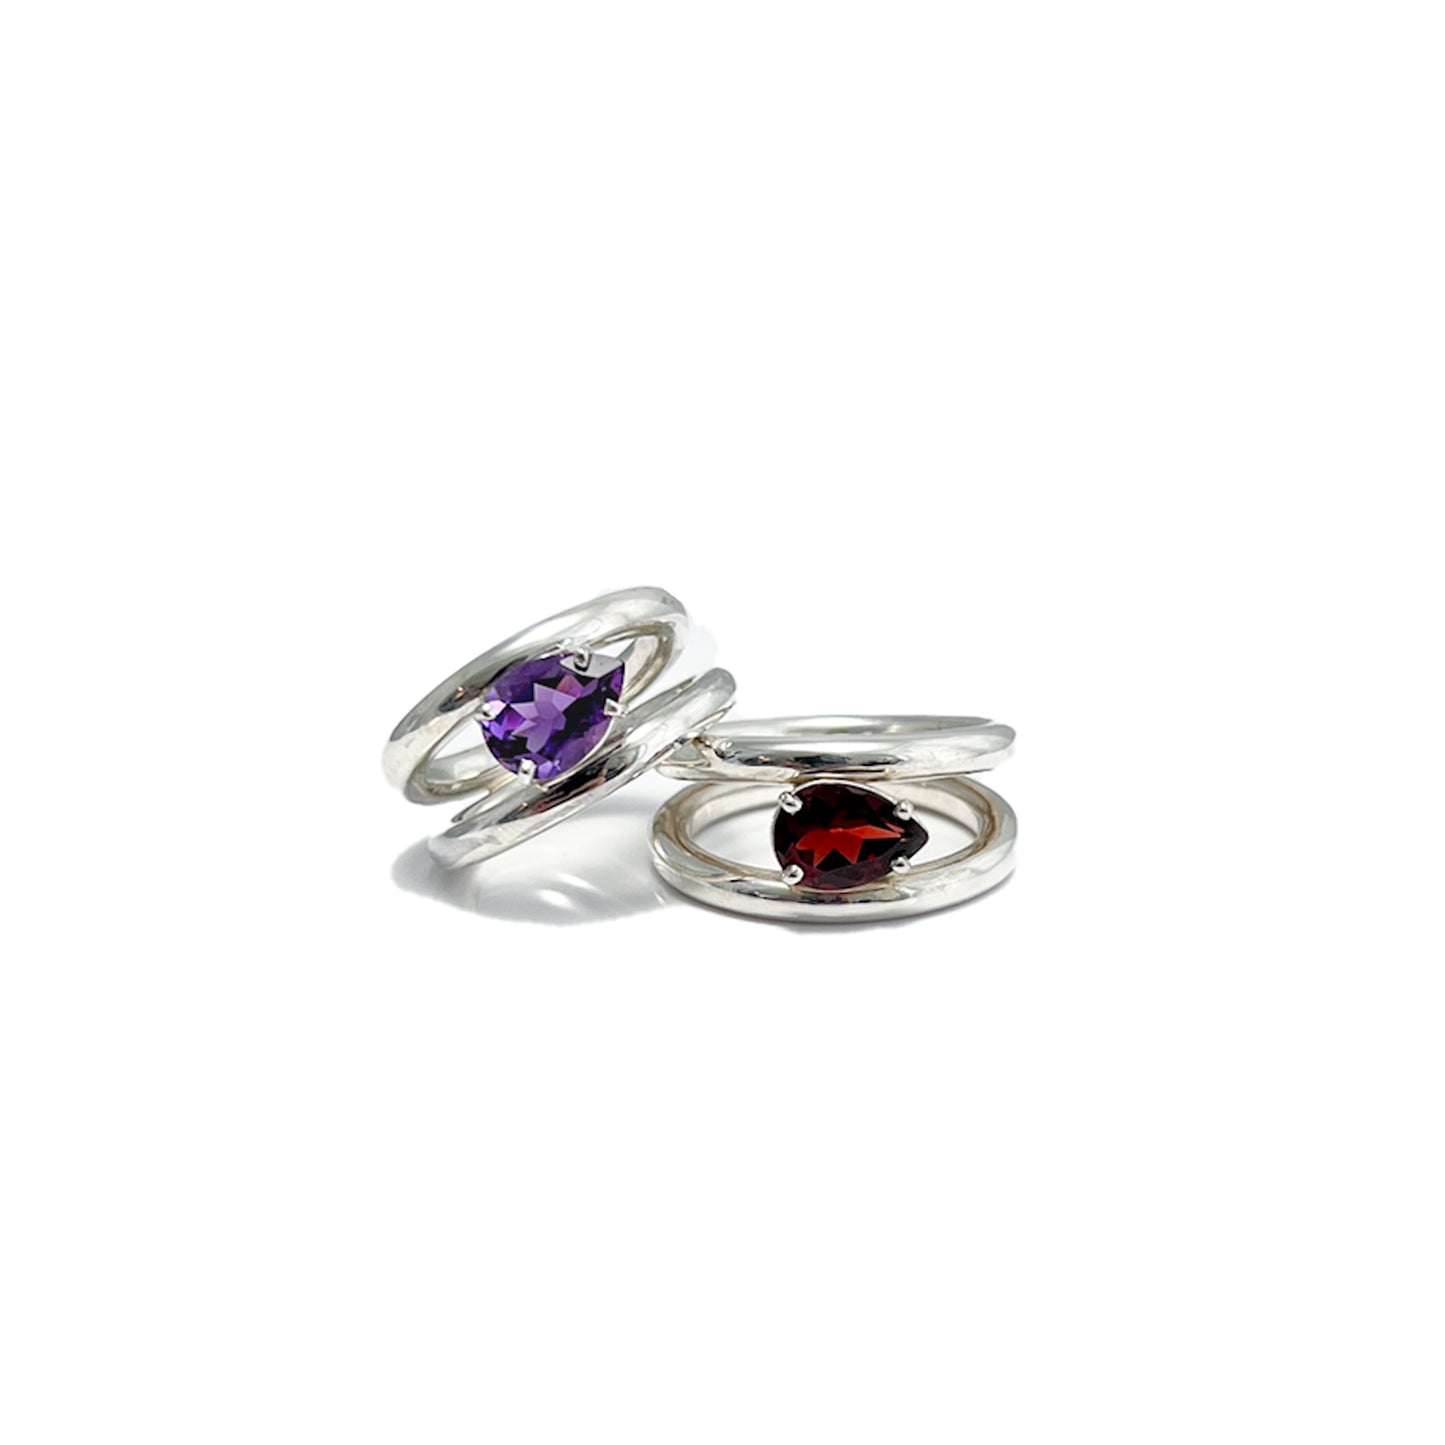 The Lily Ring - Amethyst